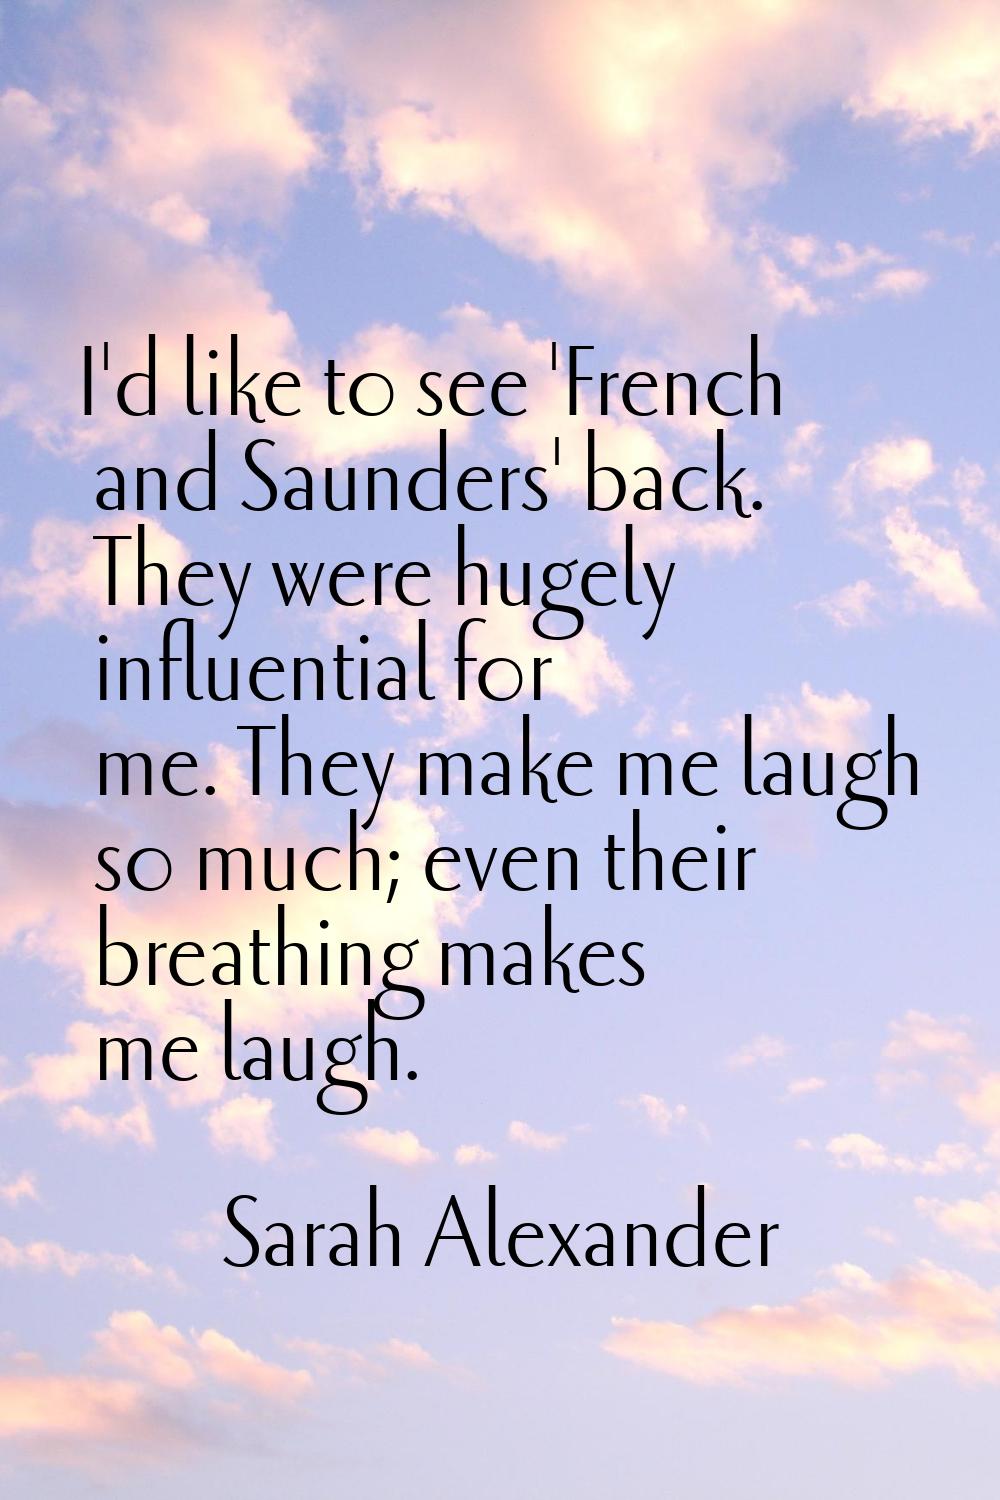 I'd like to see 'French and Saunders' back. They were hugely influential for me. They make me laugh